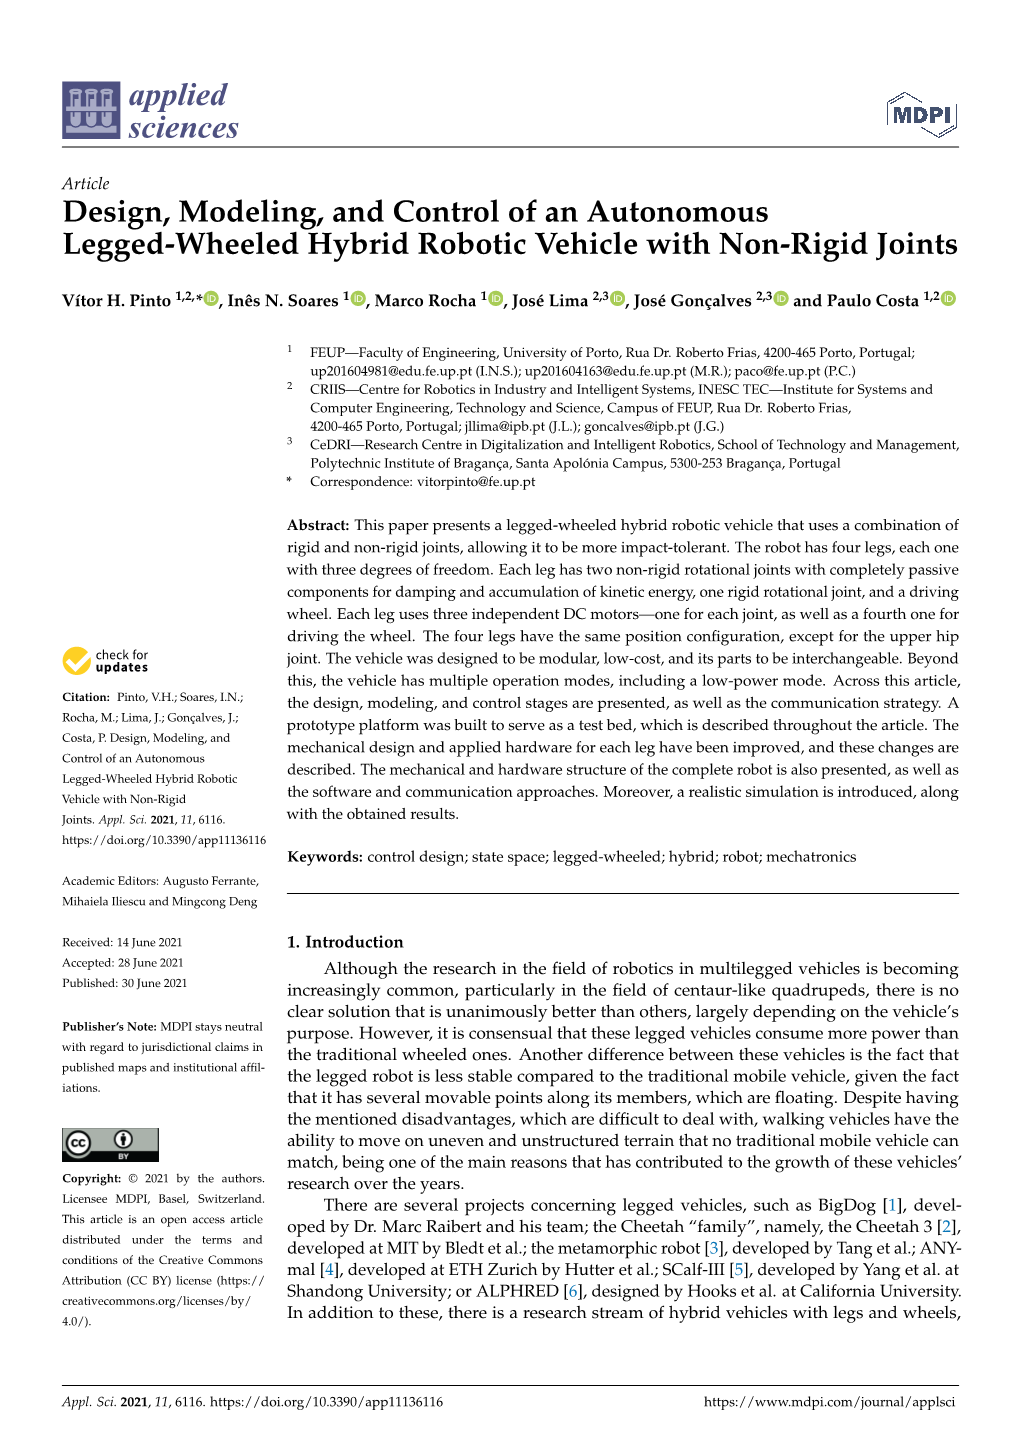 Design, Modeling, and Control of an Autonomous Legged-Wheeled Hybrid Robotic Vehicle with Non-Rigid Joints